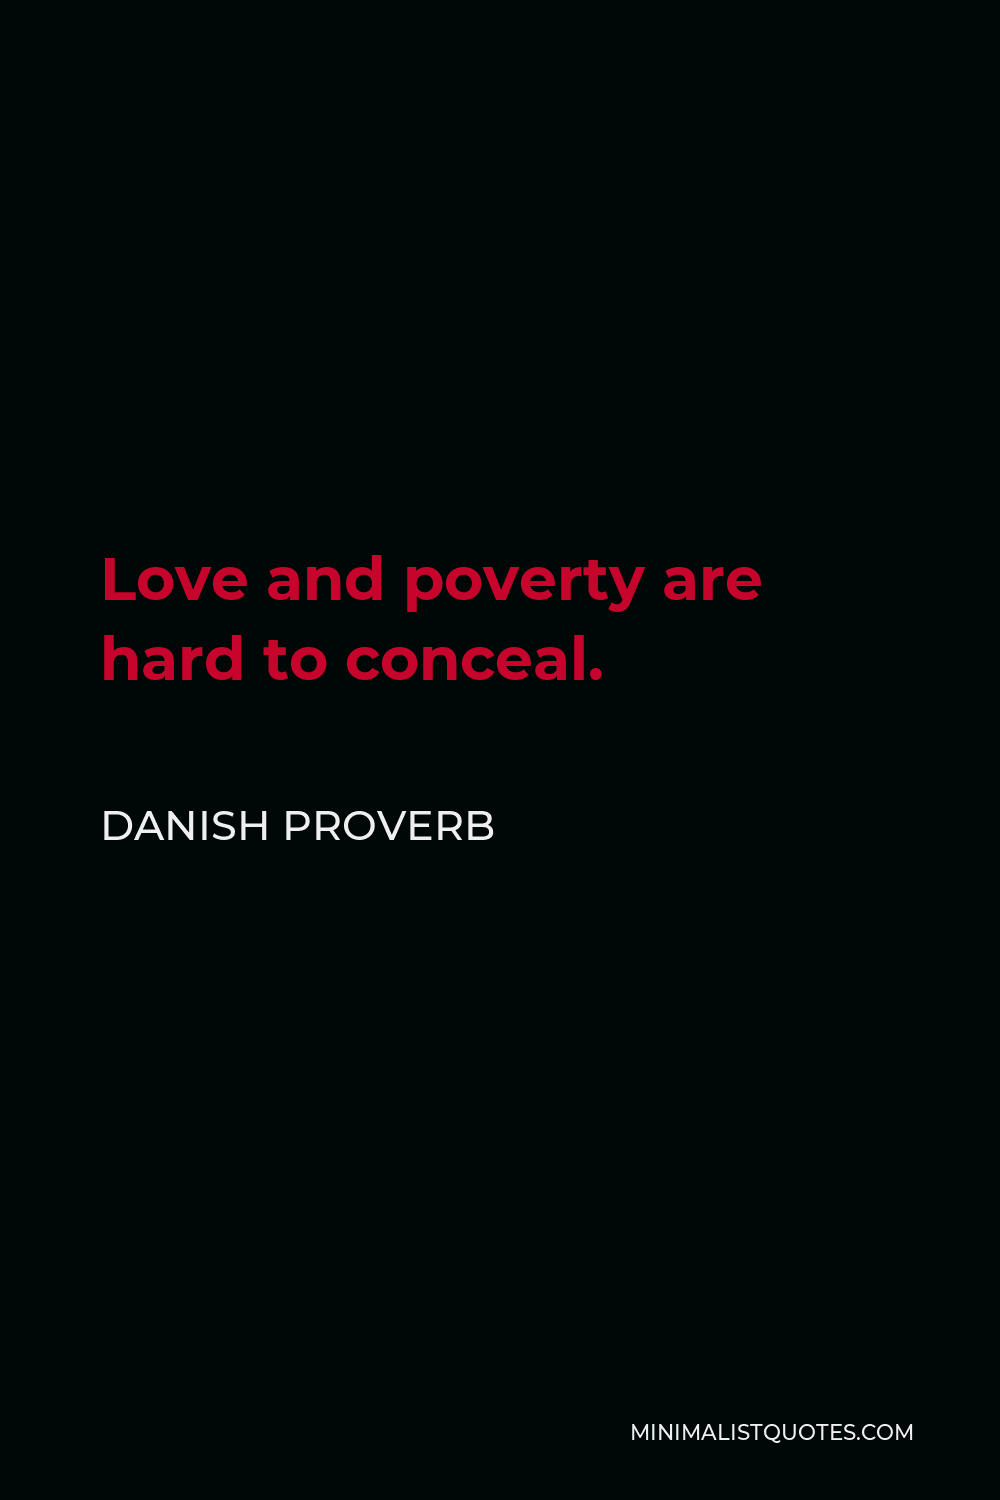 Danish Proverb Quote - Love and poverty are hard to conceal.